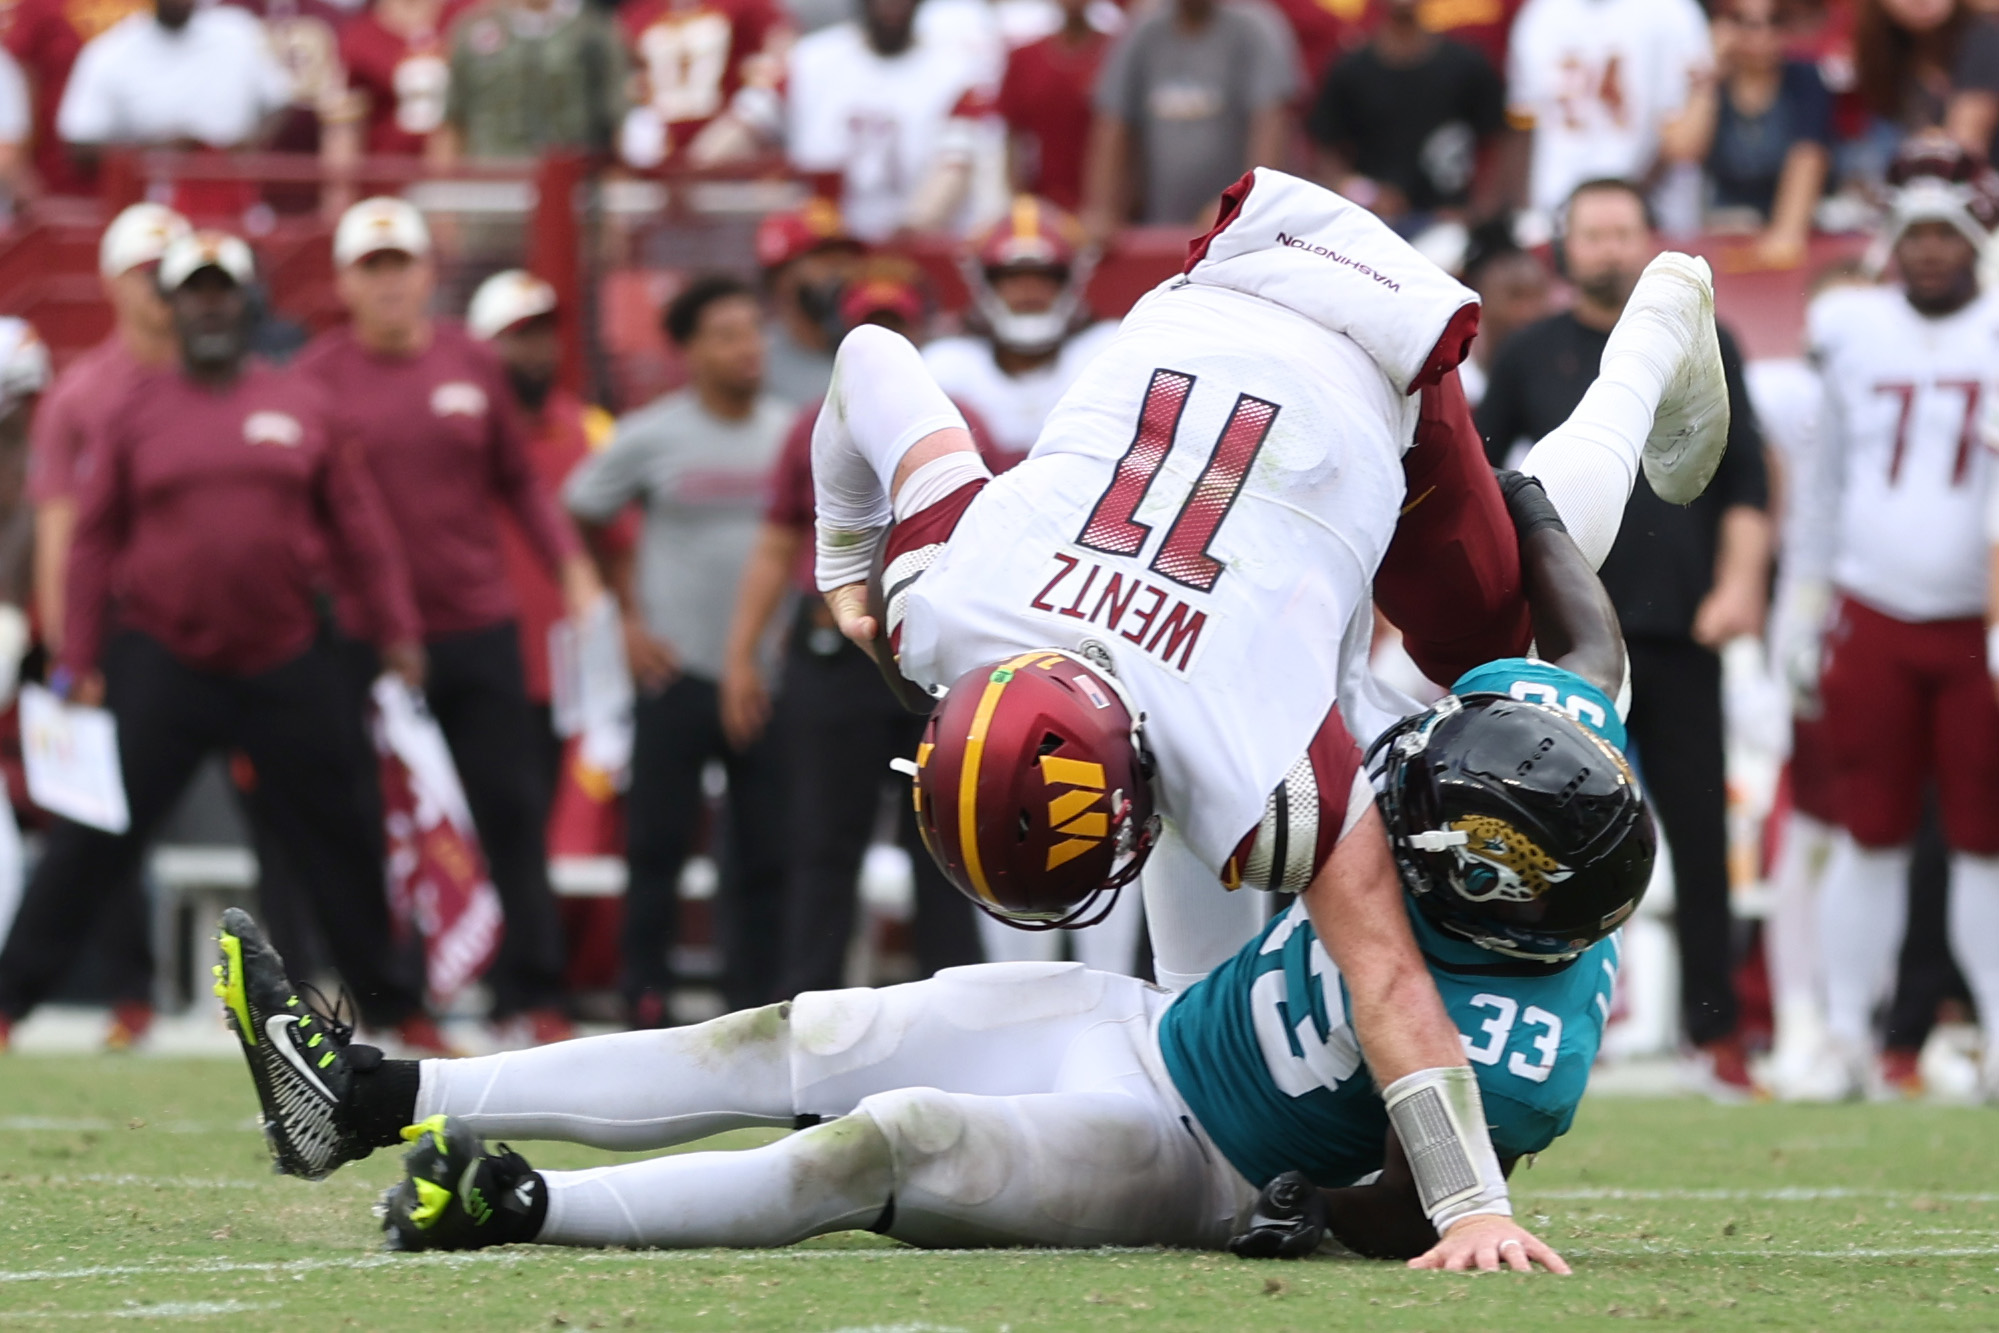 &nbsp;Devin Lloyd #33 of the Jacksonville Jaguars sacks Carson Wentz #11 of the Washington Commanders during the fourth quarter on a two point conversion attempt at FedExField on September 11, 2022 in Landover, Maryland.